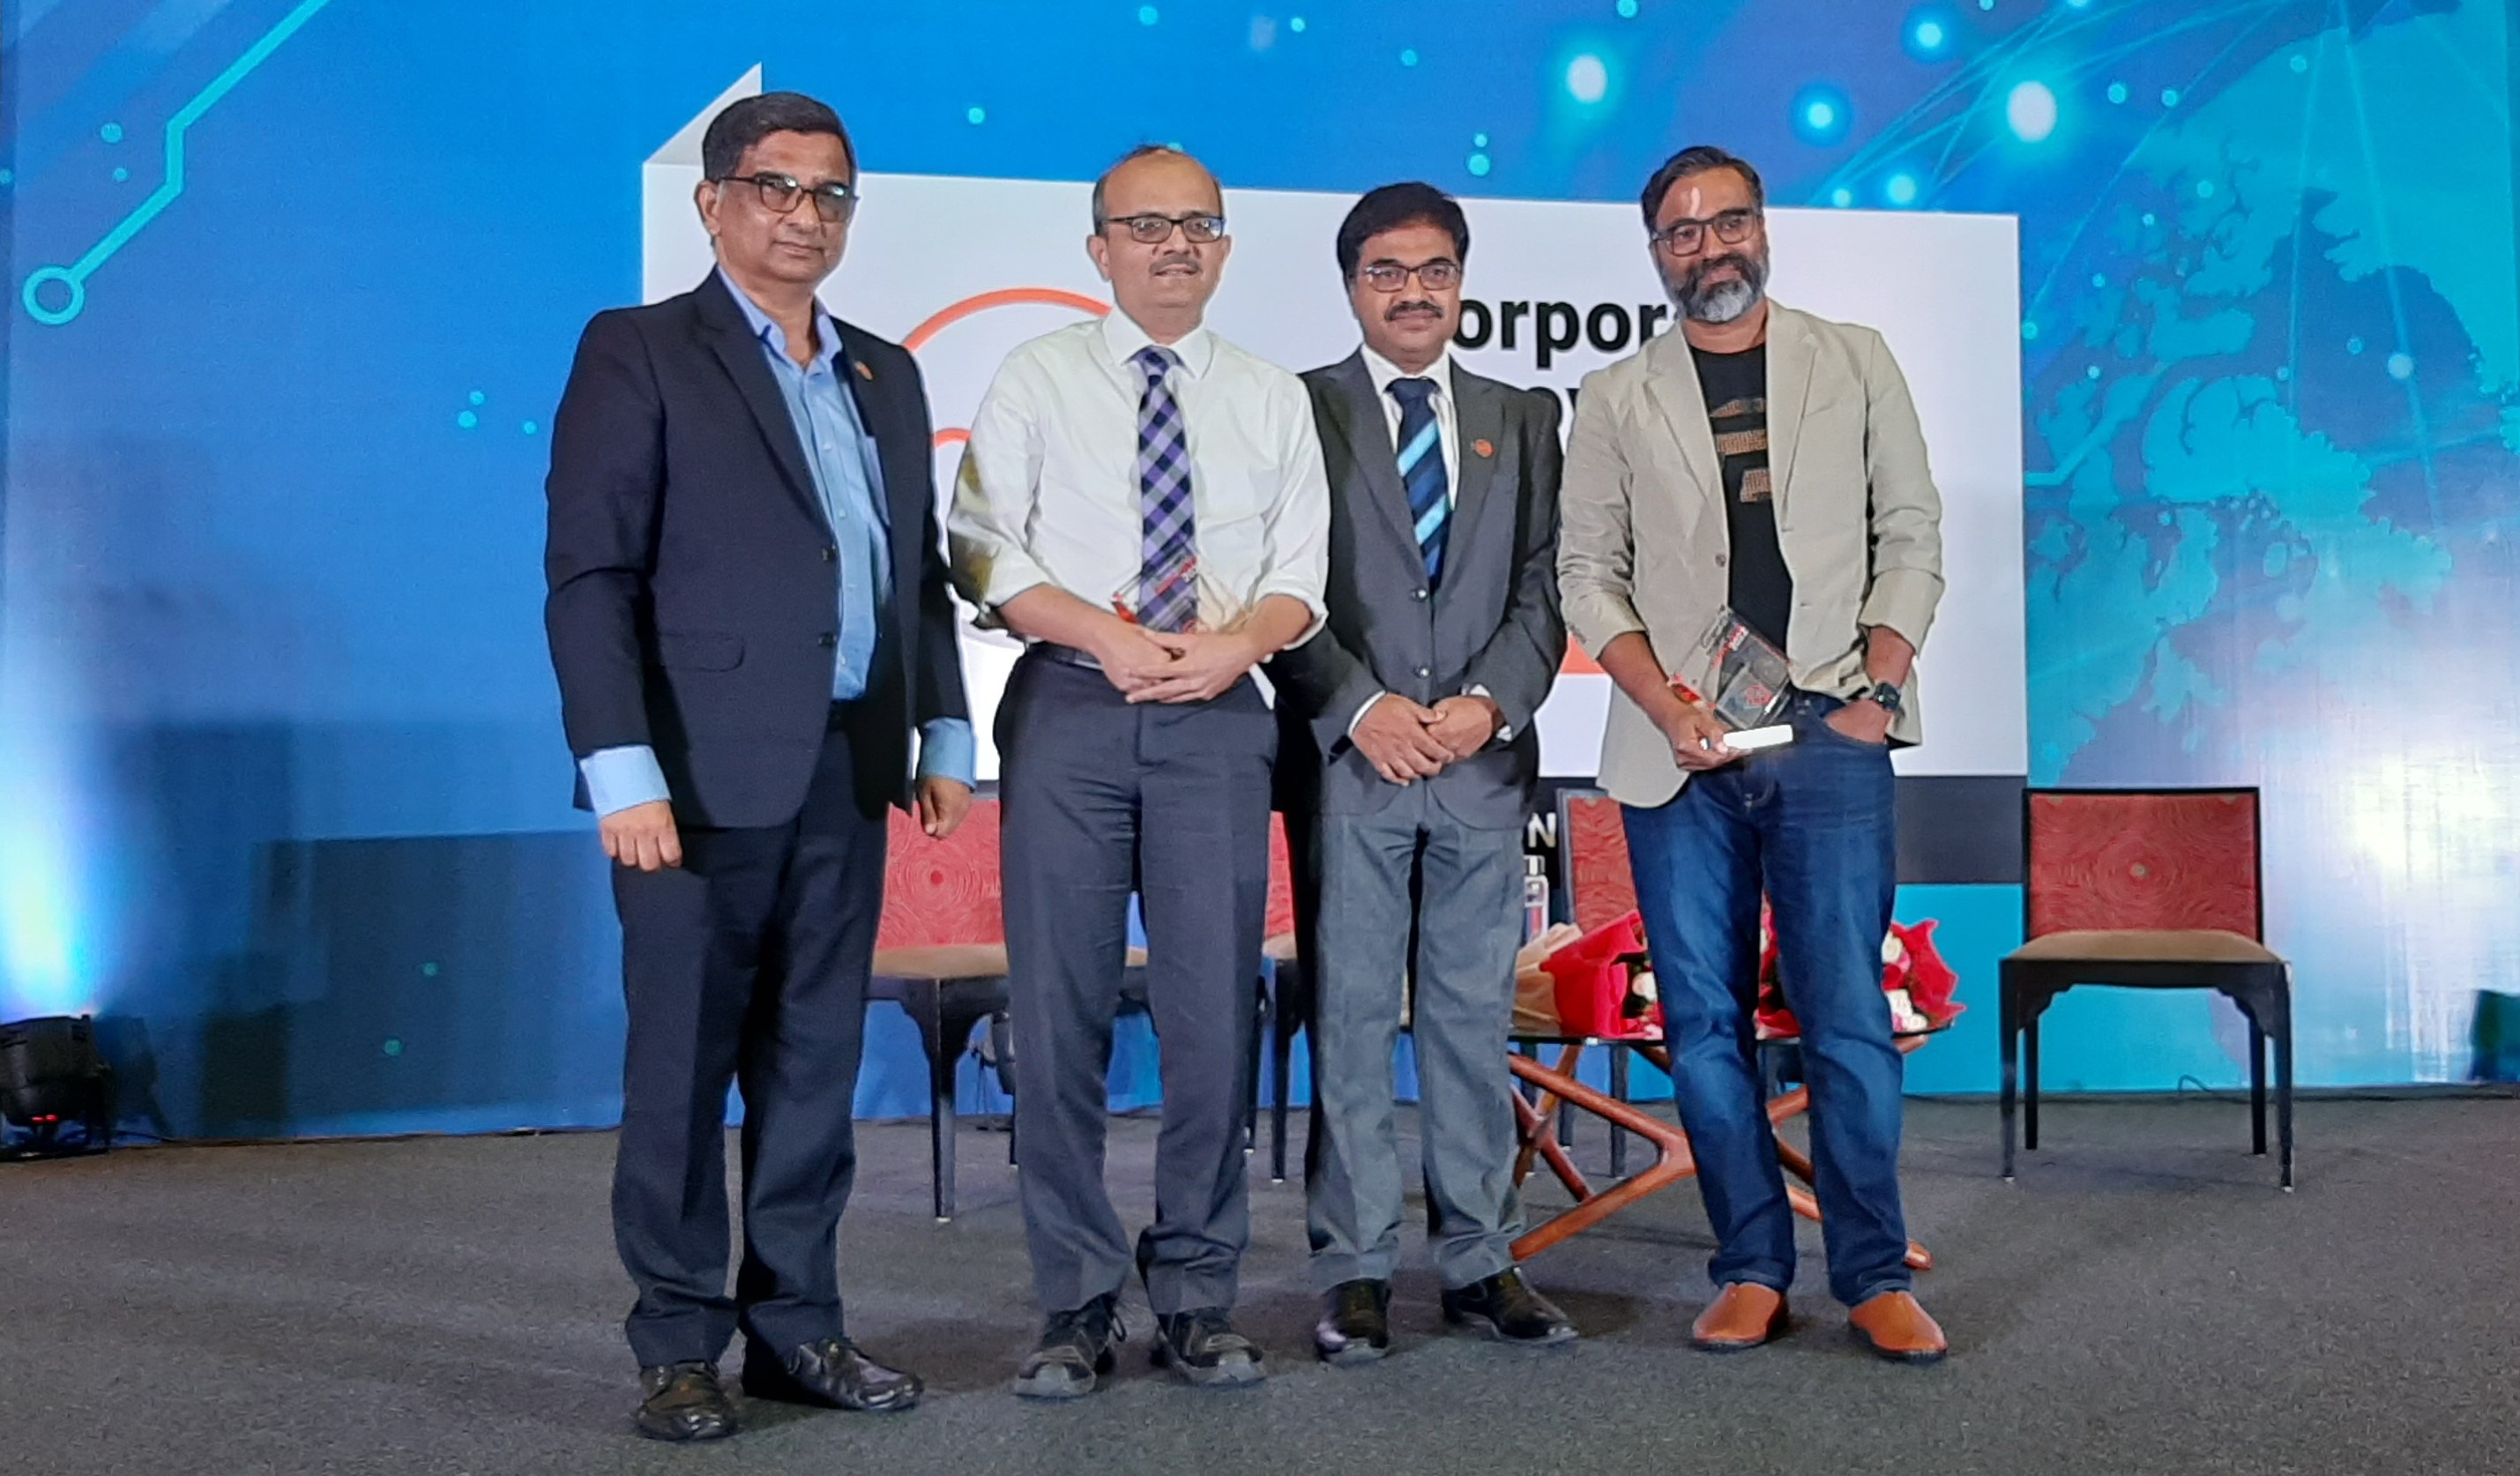 T-Hub’s Corporate Innovation Conclave Sparks Collaboration to Promote Open Innovation in Corporates